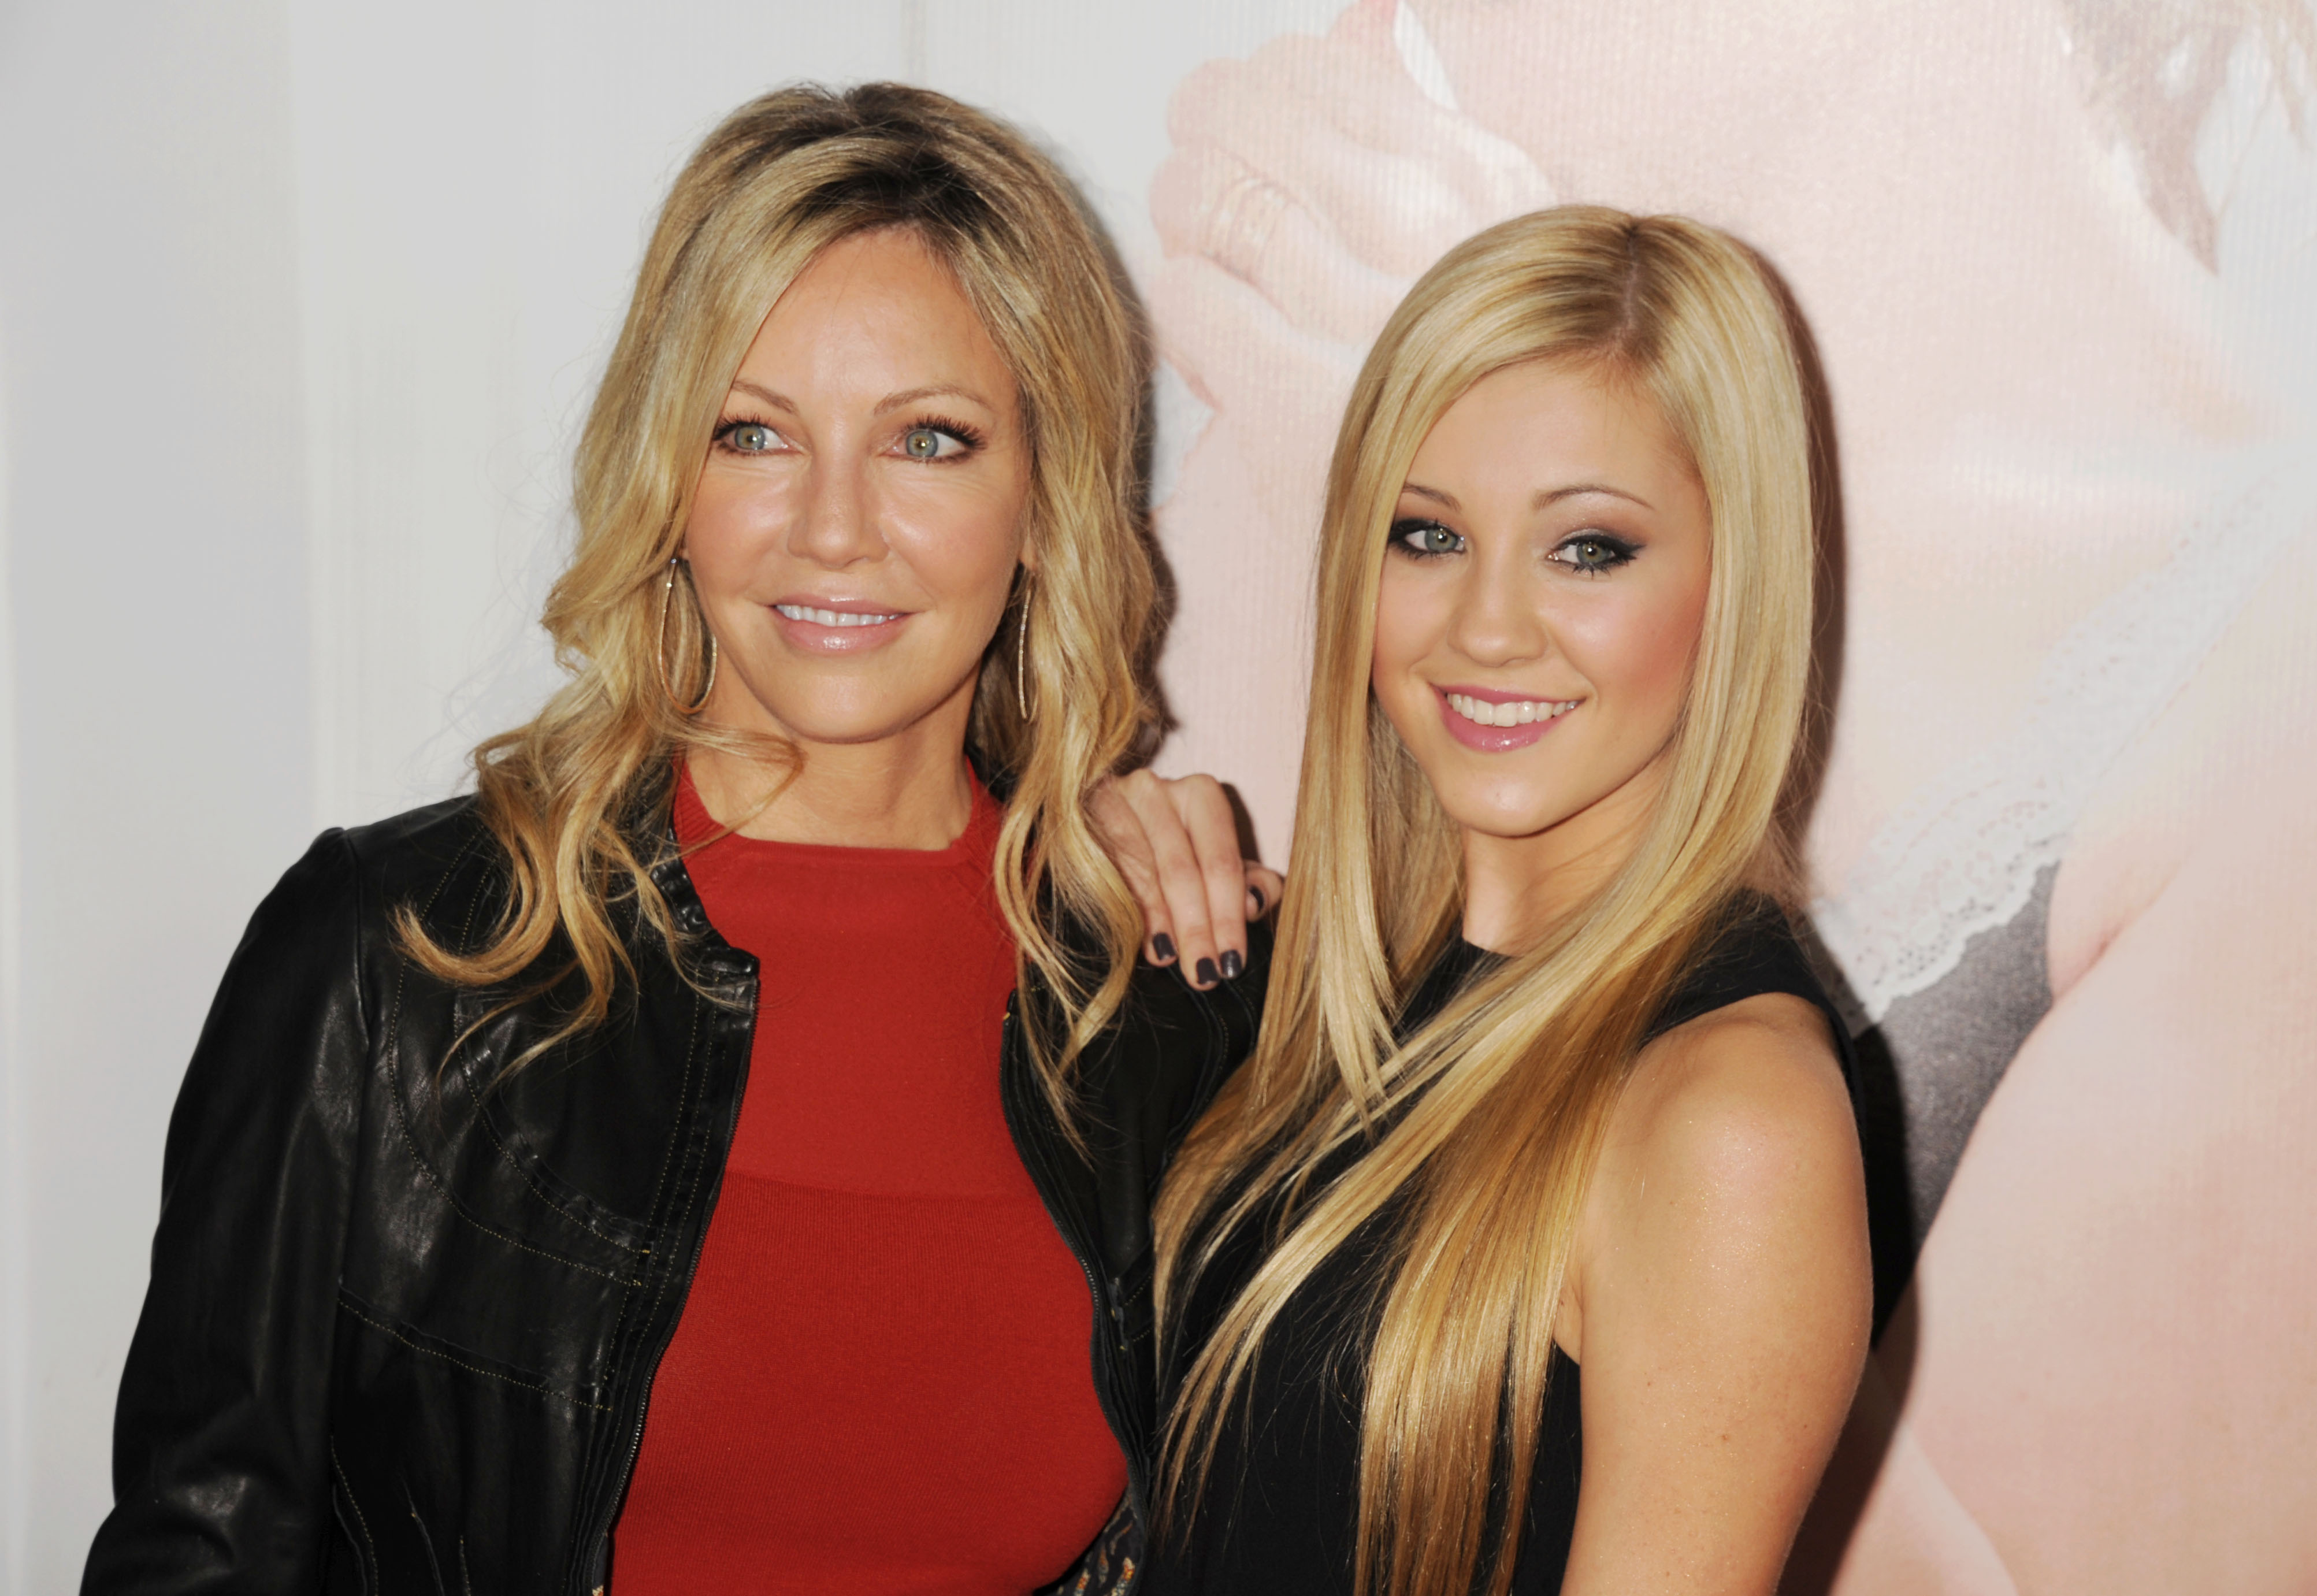 Heather Locklear and Ava Sambora arrive at the "This Is 40" Los Angeles Premiere at Grauman's Chinese Theatre on December 12, 2012 in Hollywood, California | Source: Getty Images